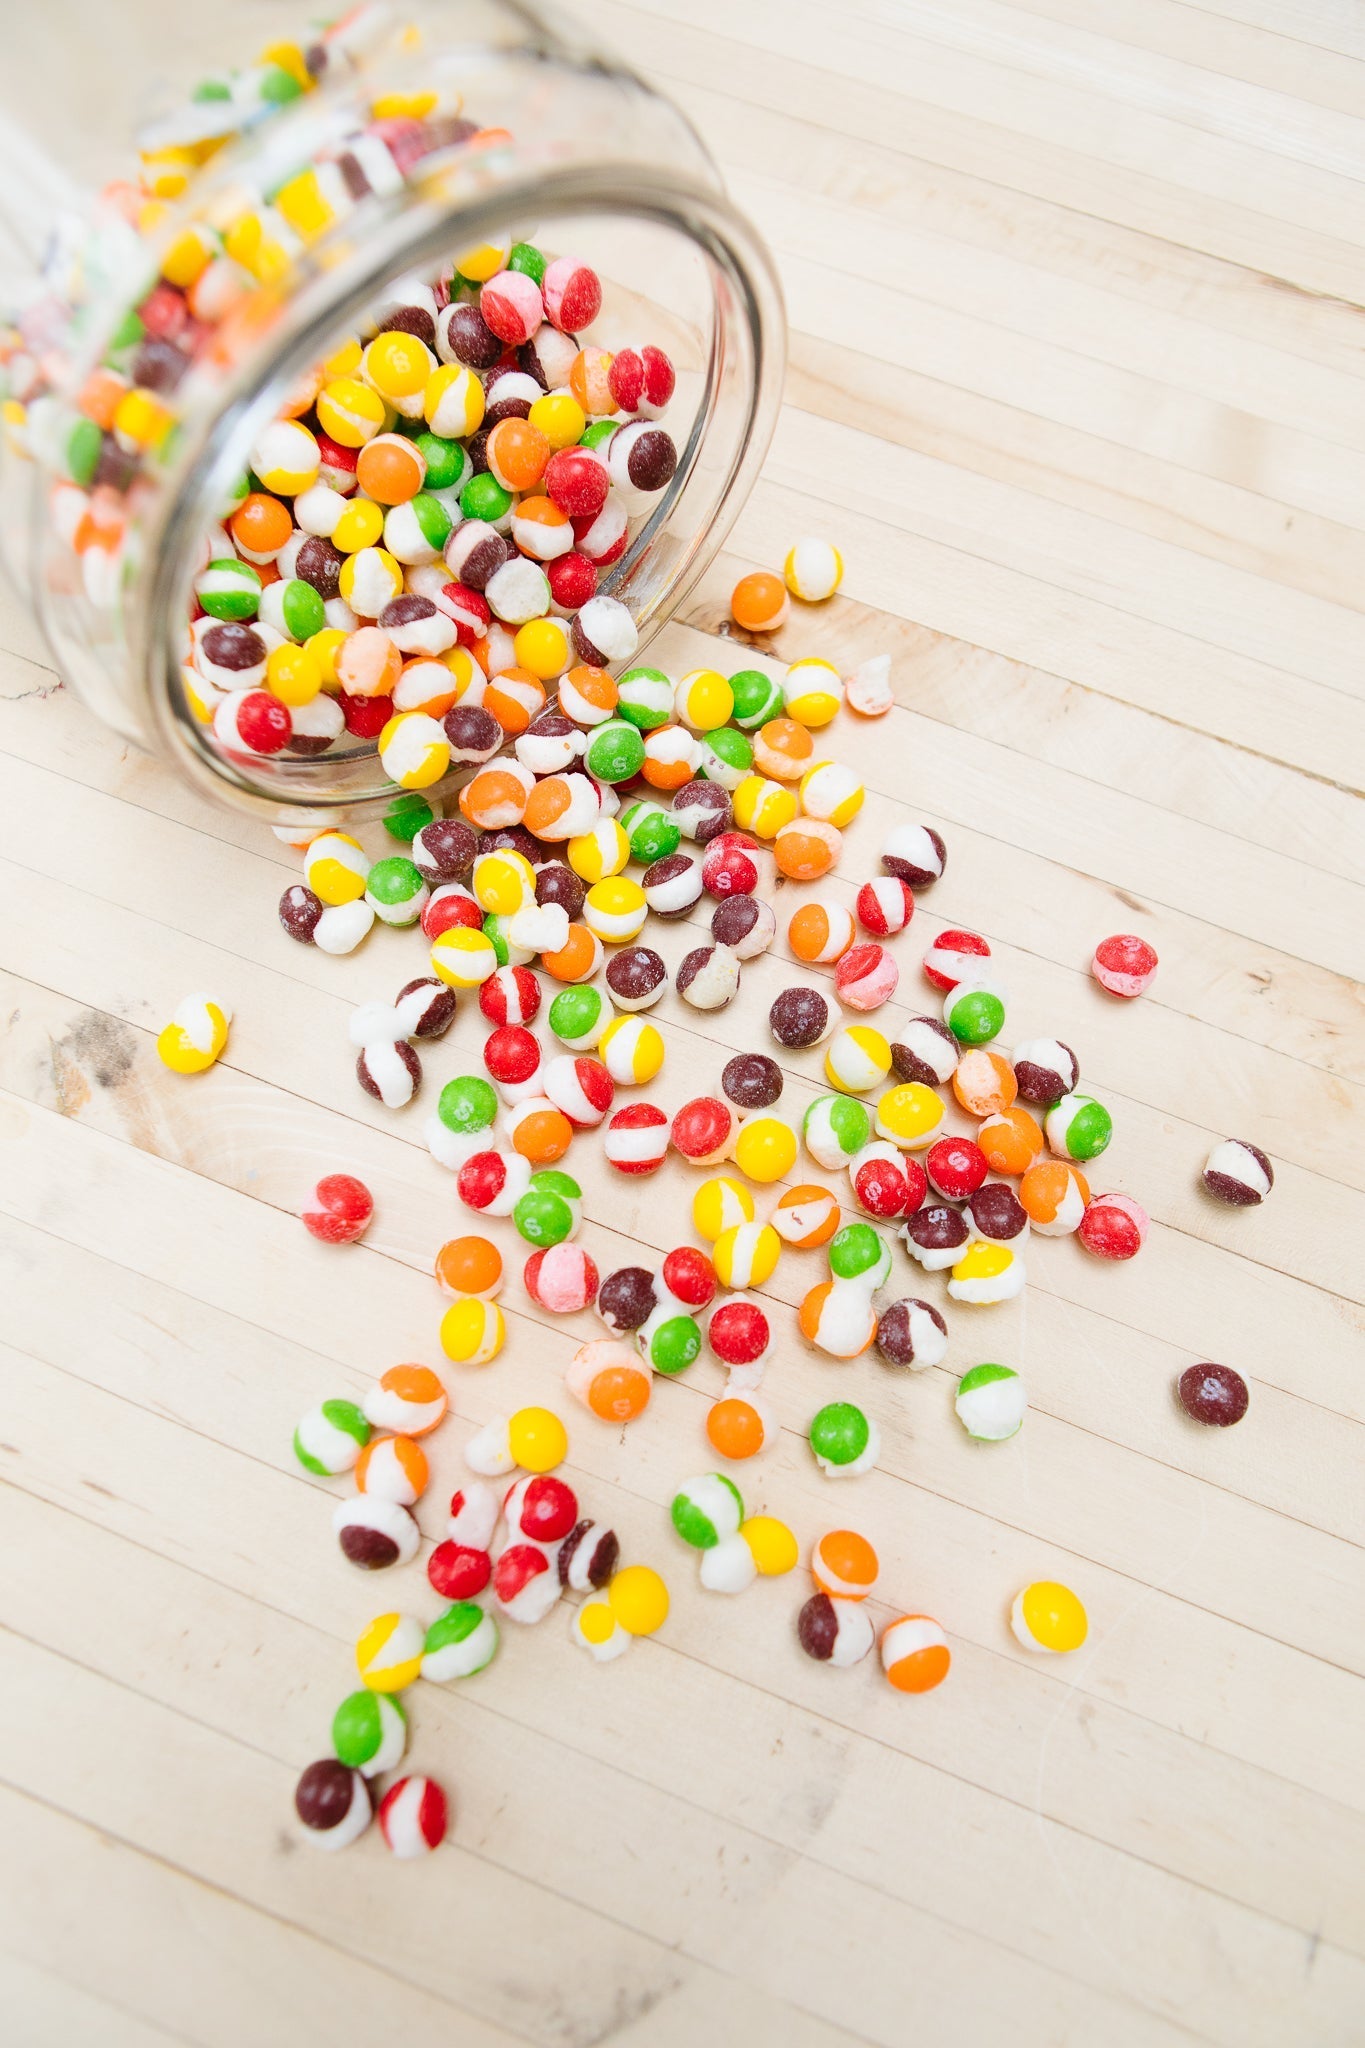 Freeze Dried Skittles 6 Oz (Online Exclusive)